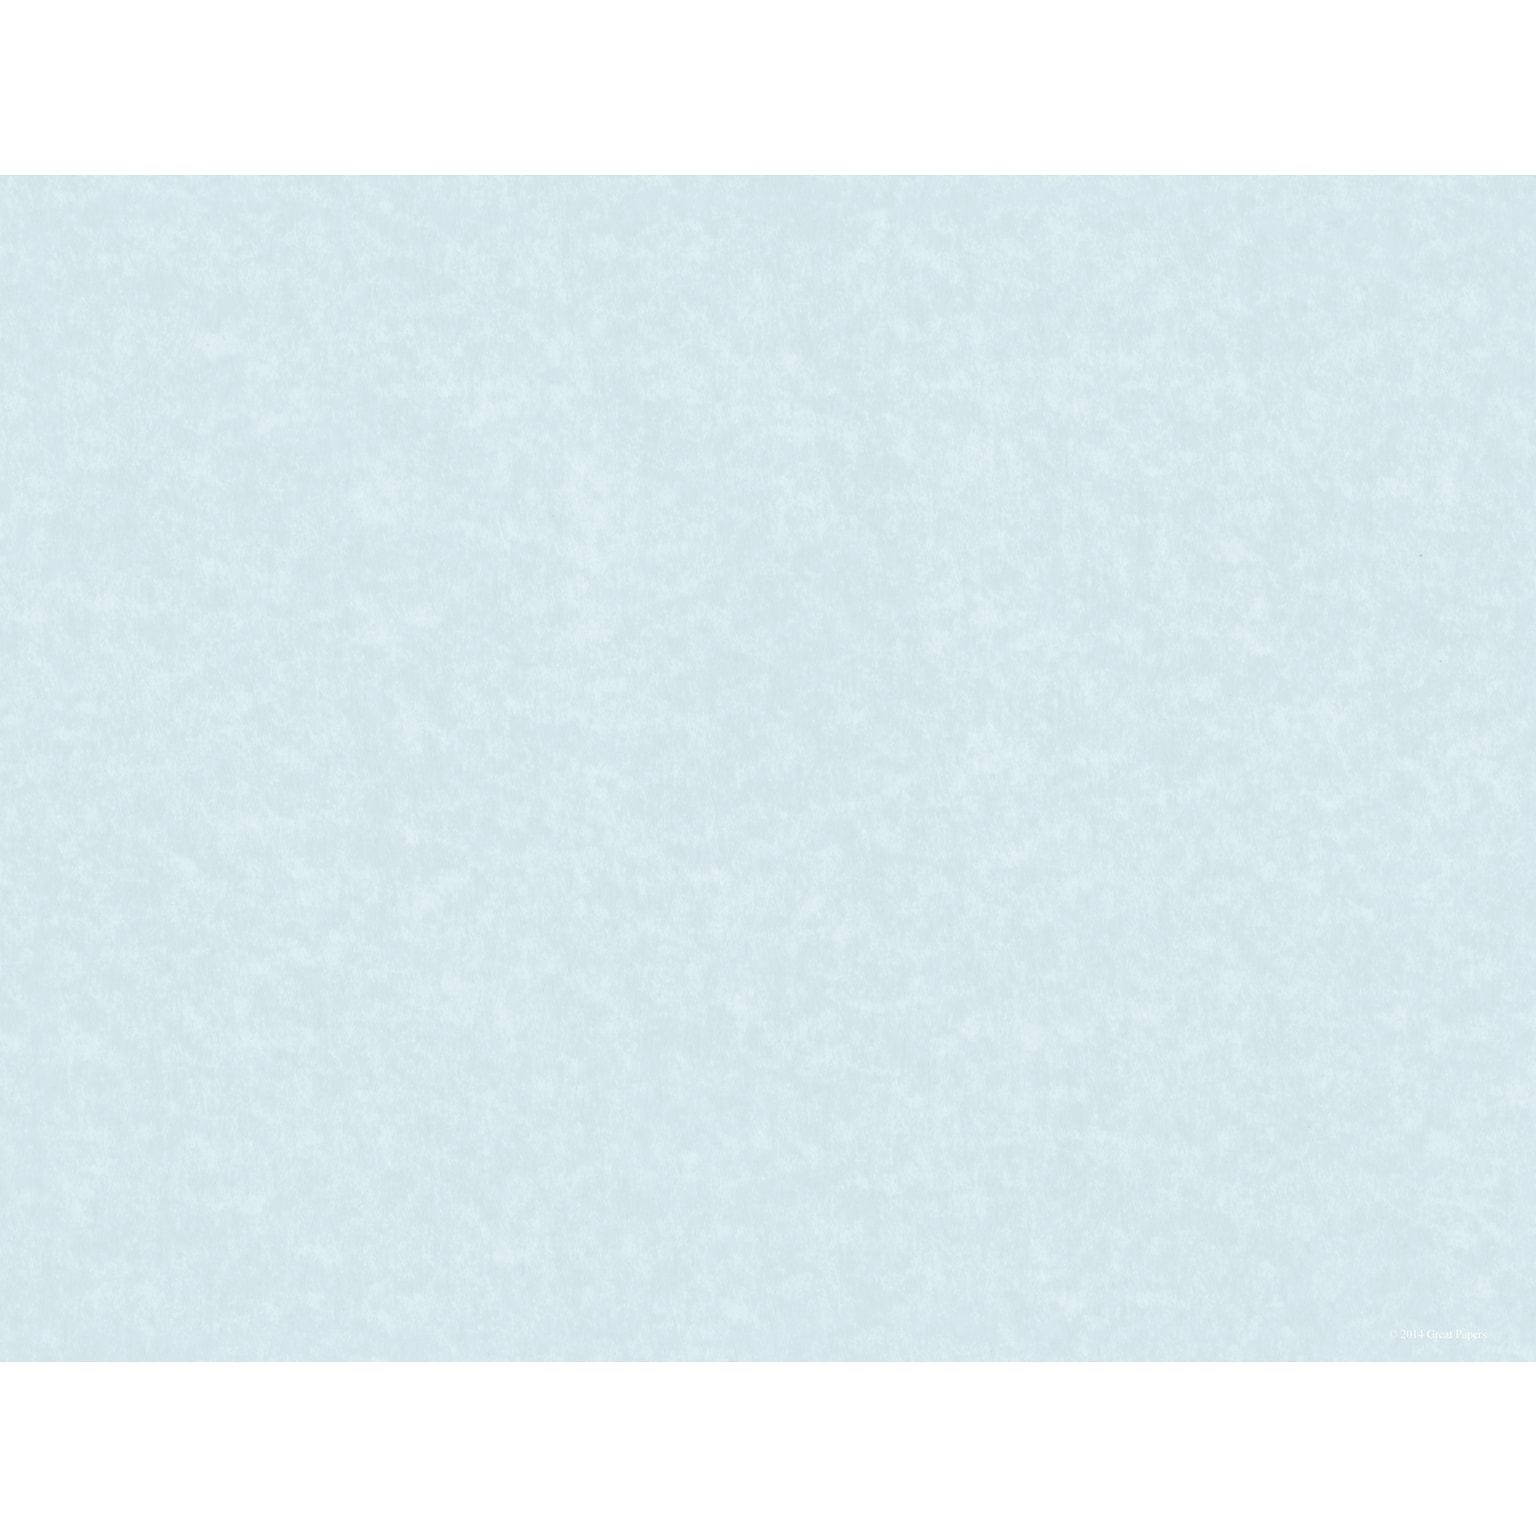 Great Papers® Blue Faux-Parchment Certificate, 50/Pack